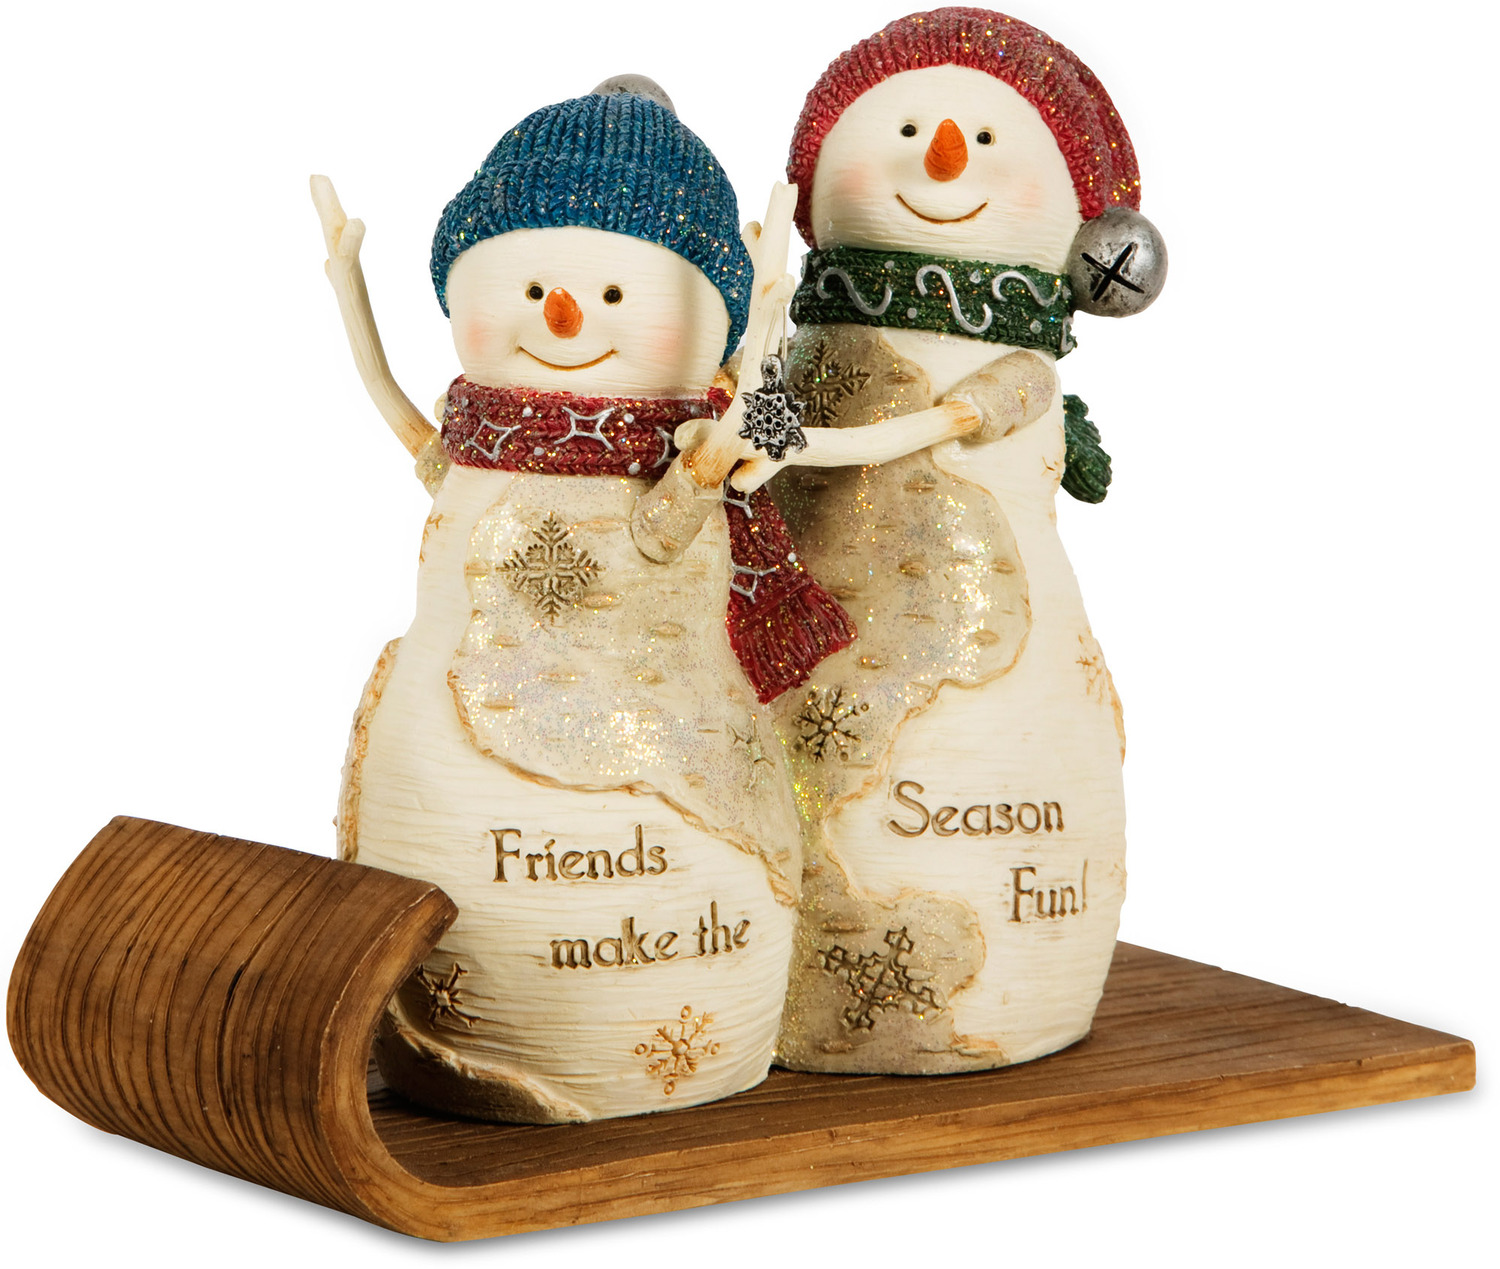 Fun Friends by The Birchhearts - Christmas Friendly Sledding Snowman Collectible/Figurine